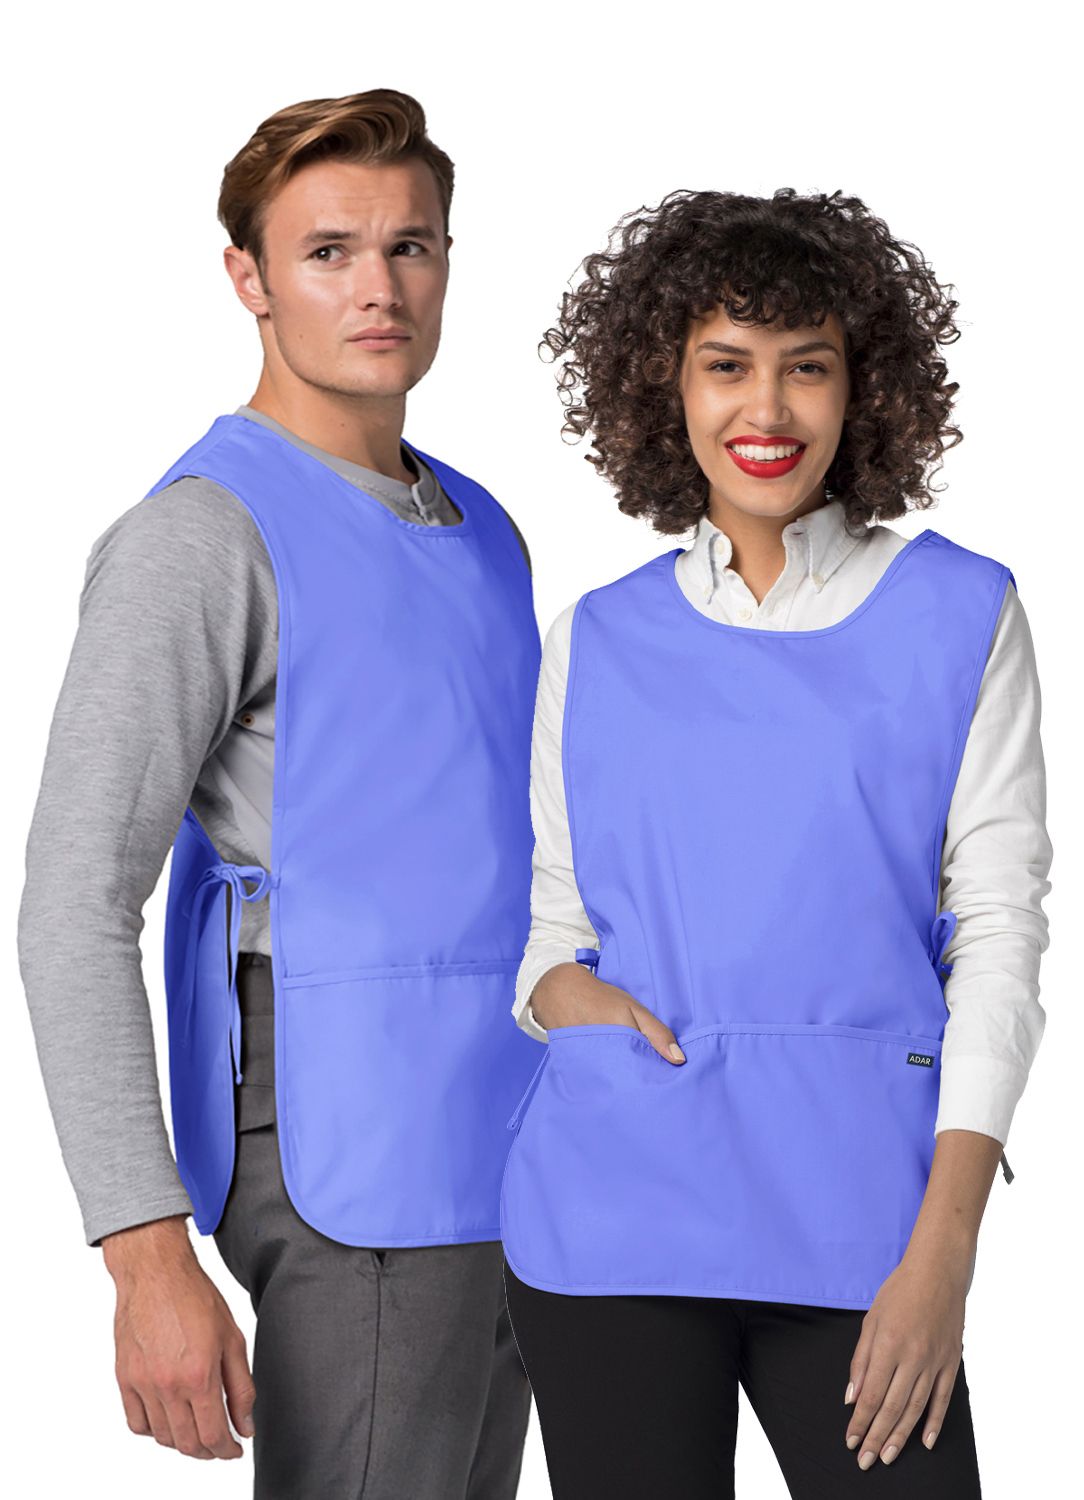 With Pockets For Beauty & Medical Jobs Adar Uniforms Unisex Work Apron 3 Pack 